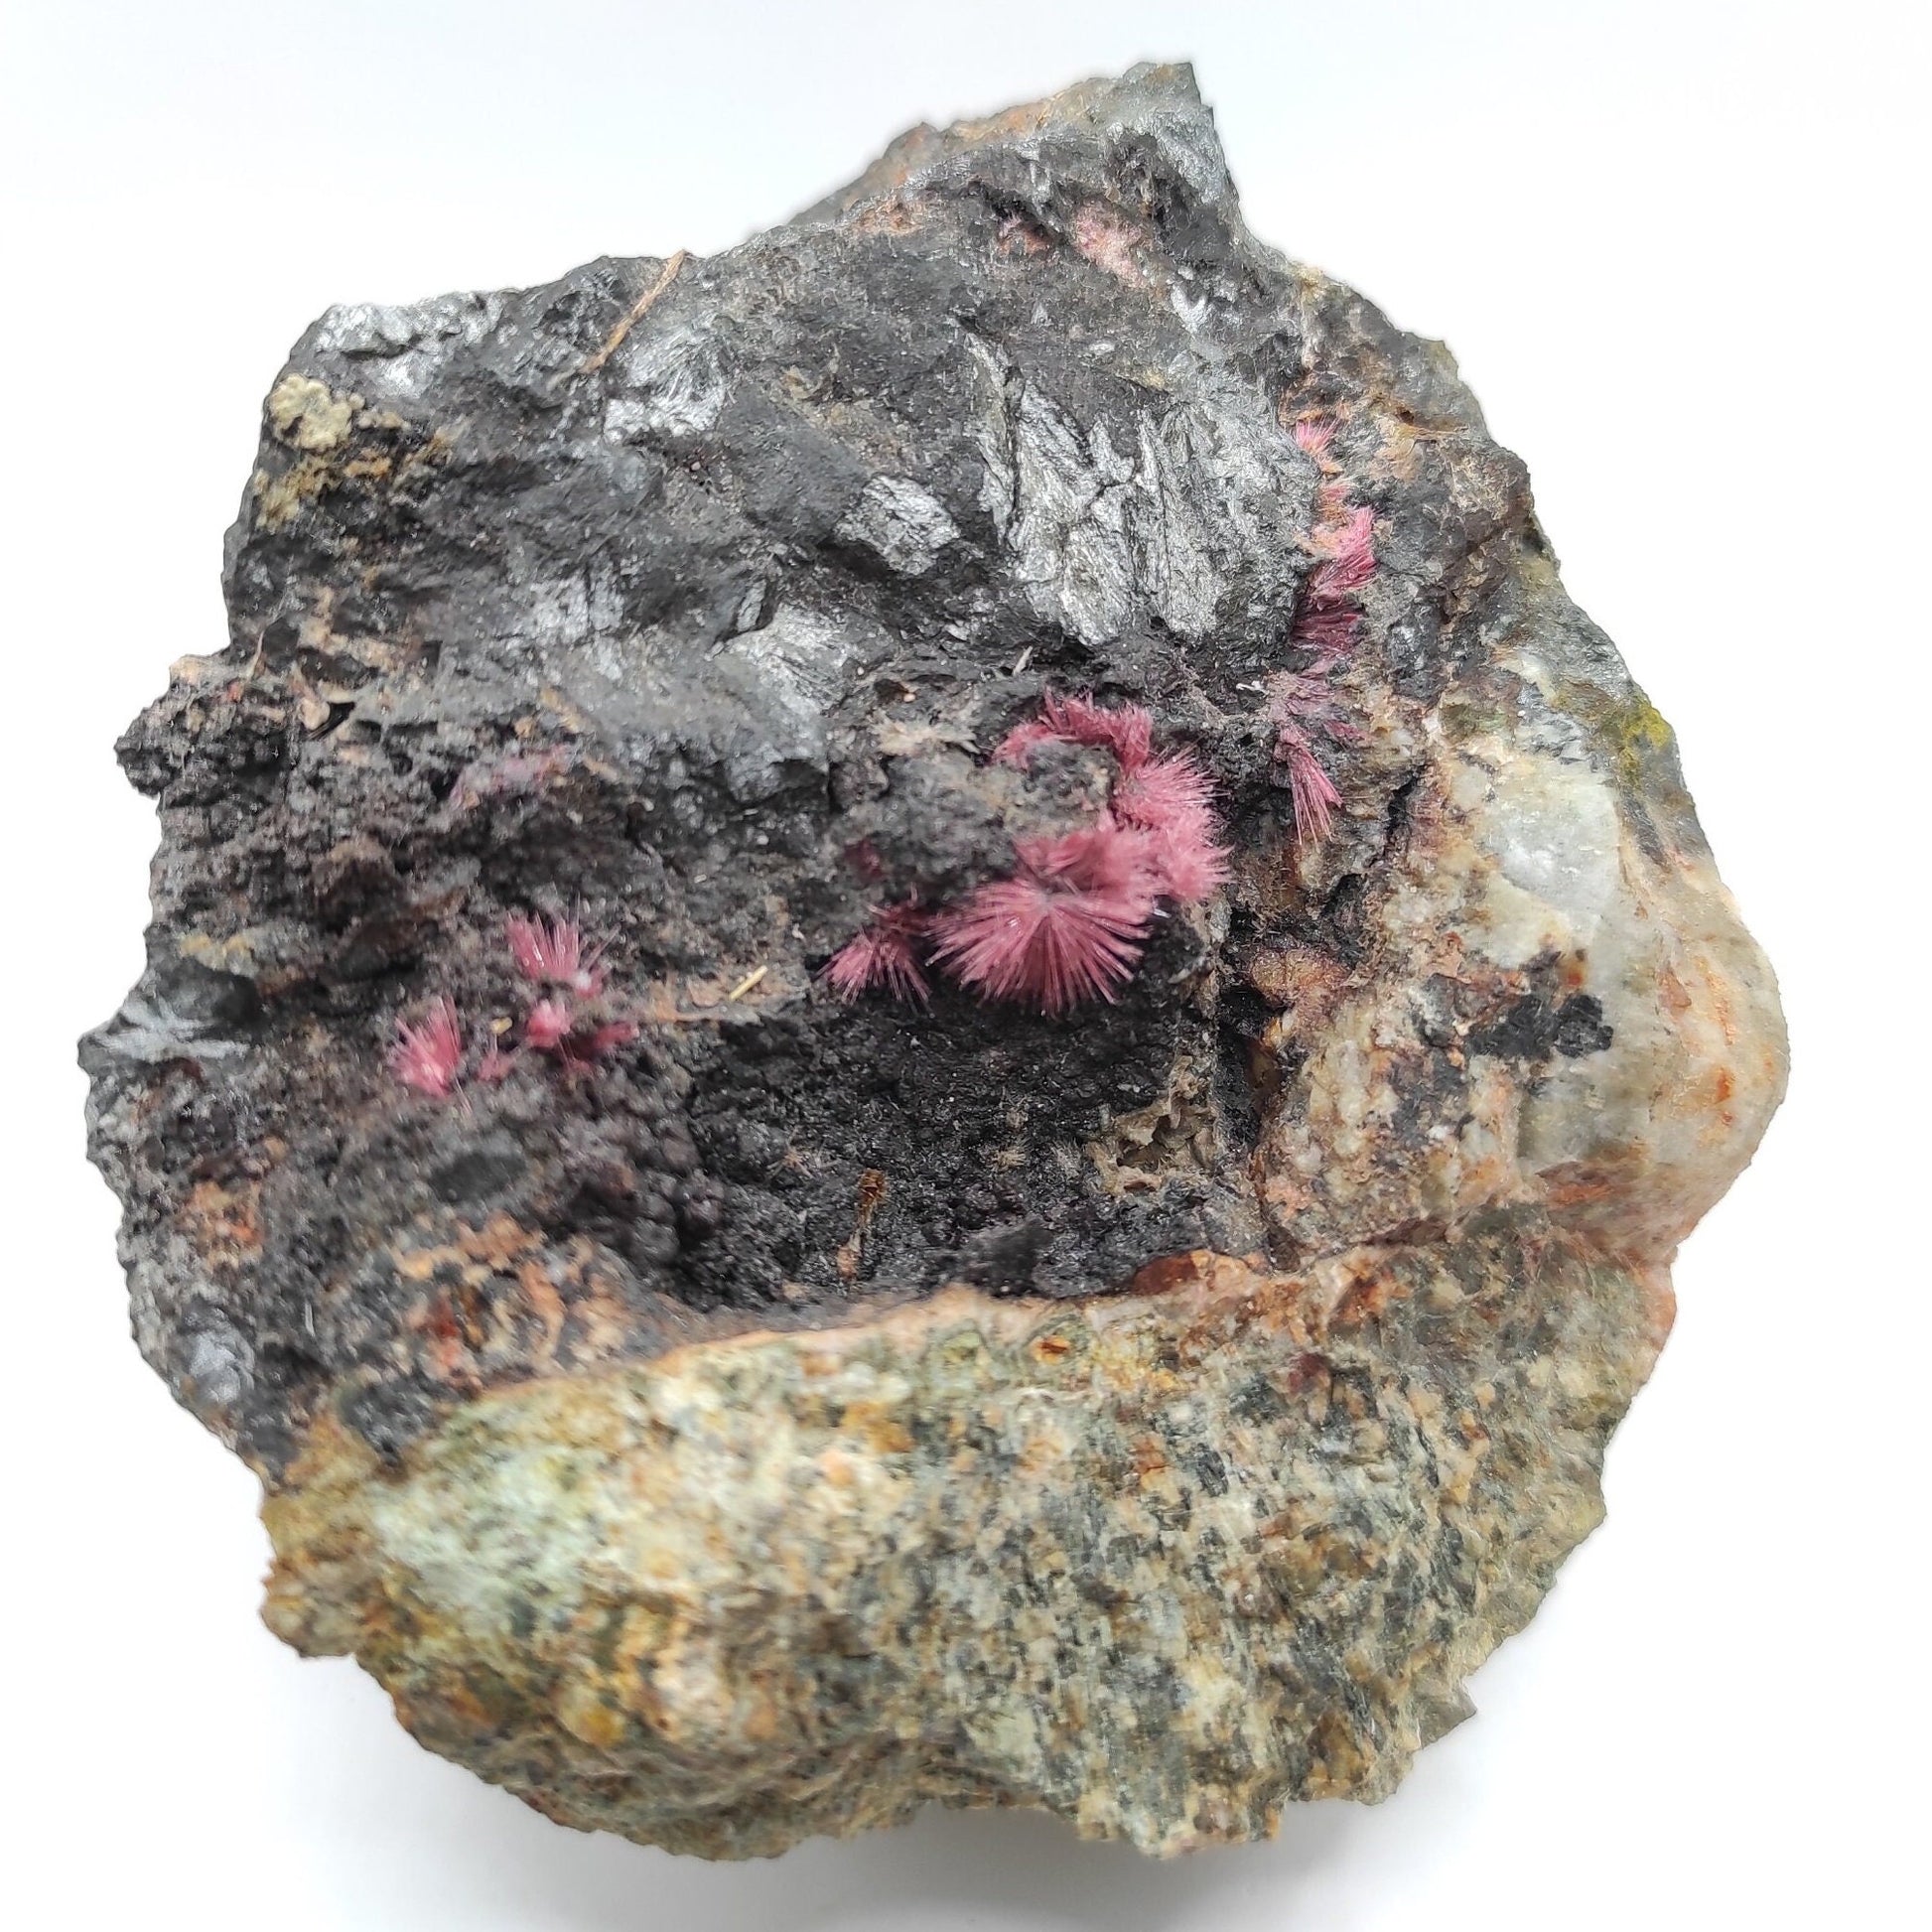 Rare! 970g Fibrous Erythrite in Matrix - Bou Azzer, Morocco - Fine Mineral Specimens - Pink Erythrite Crystals - Rare Cobalt Crystal